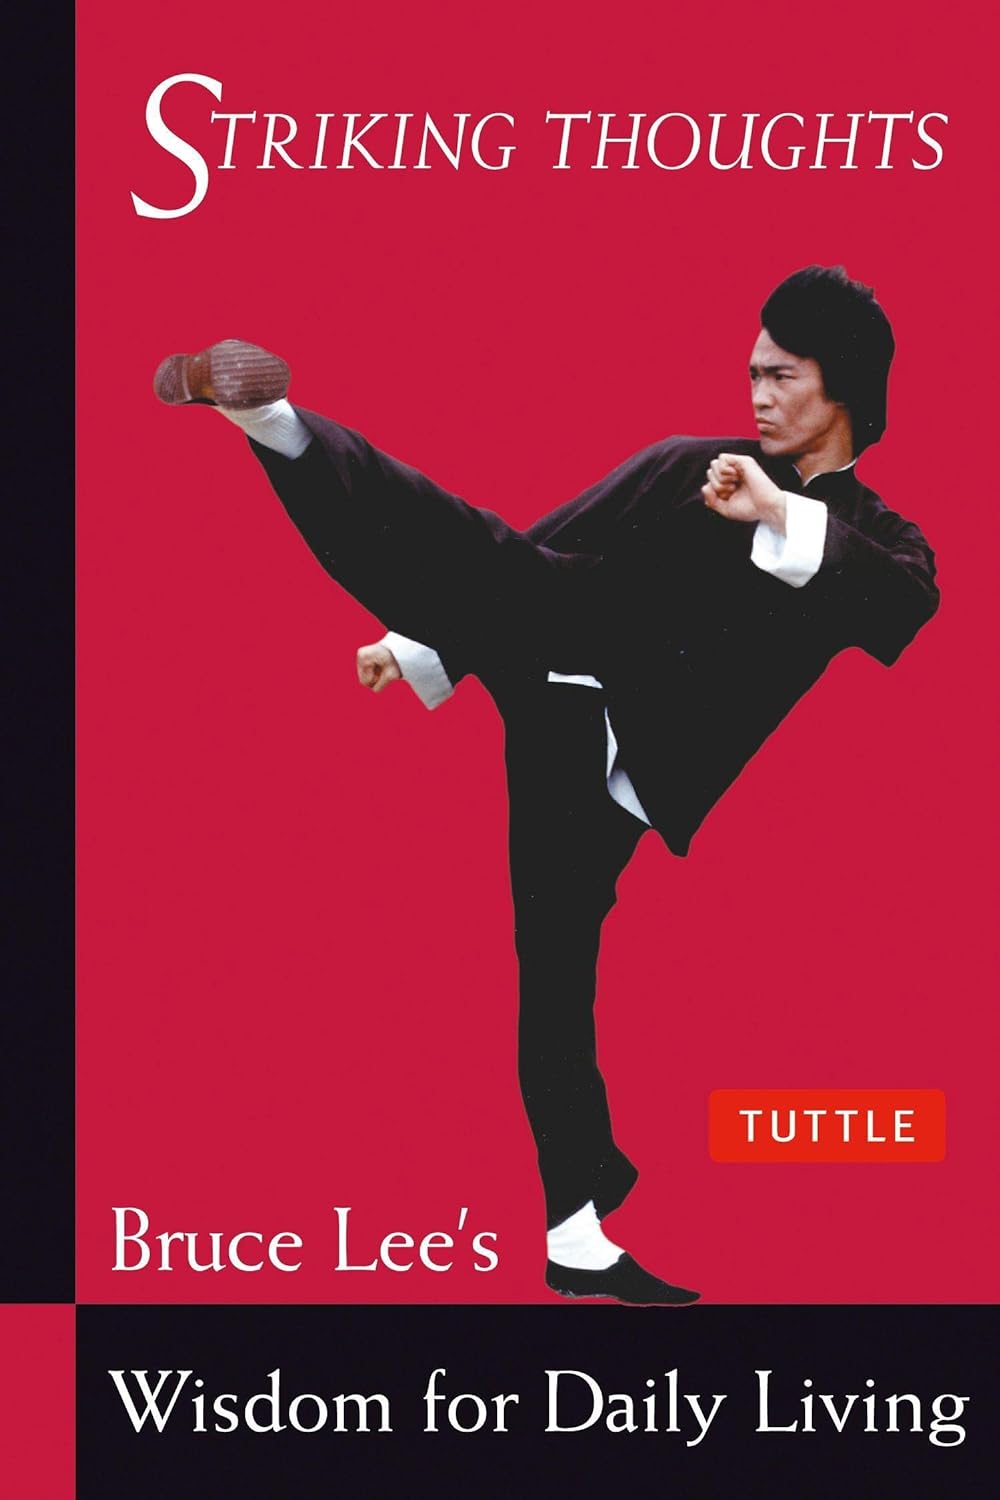 Bruce Lee Striking Thoughts: Bruce Lee's Wisdom for Daily Living Book (Preowned)